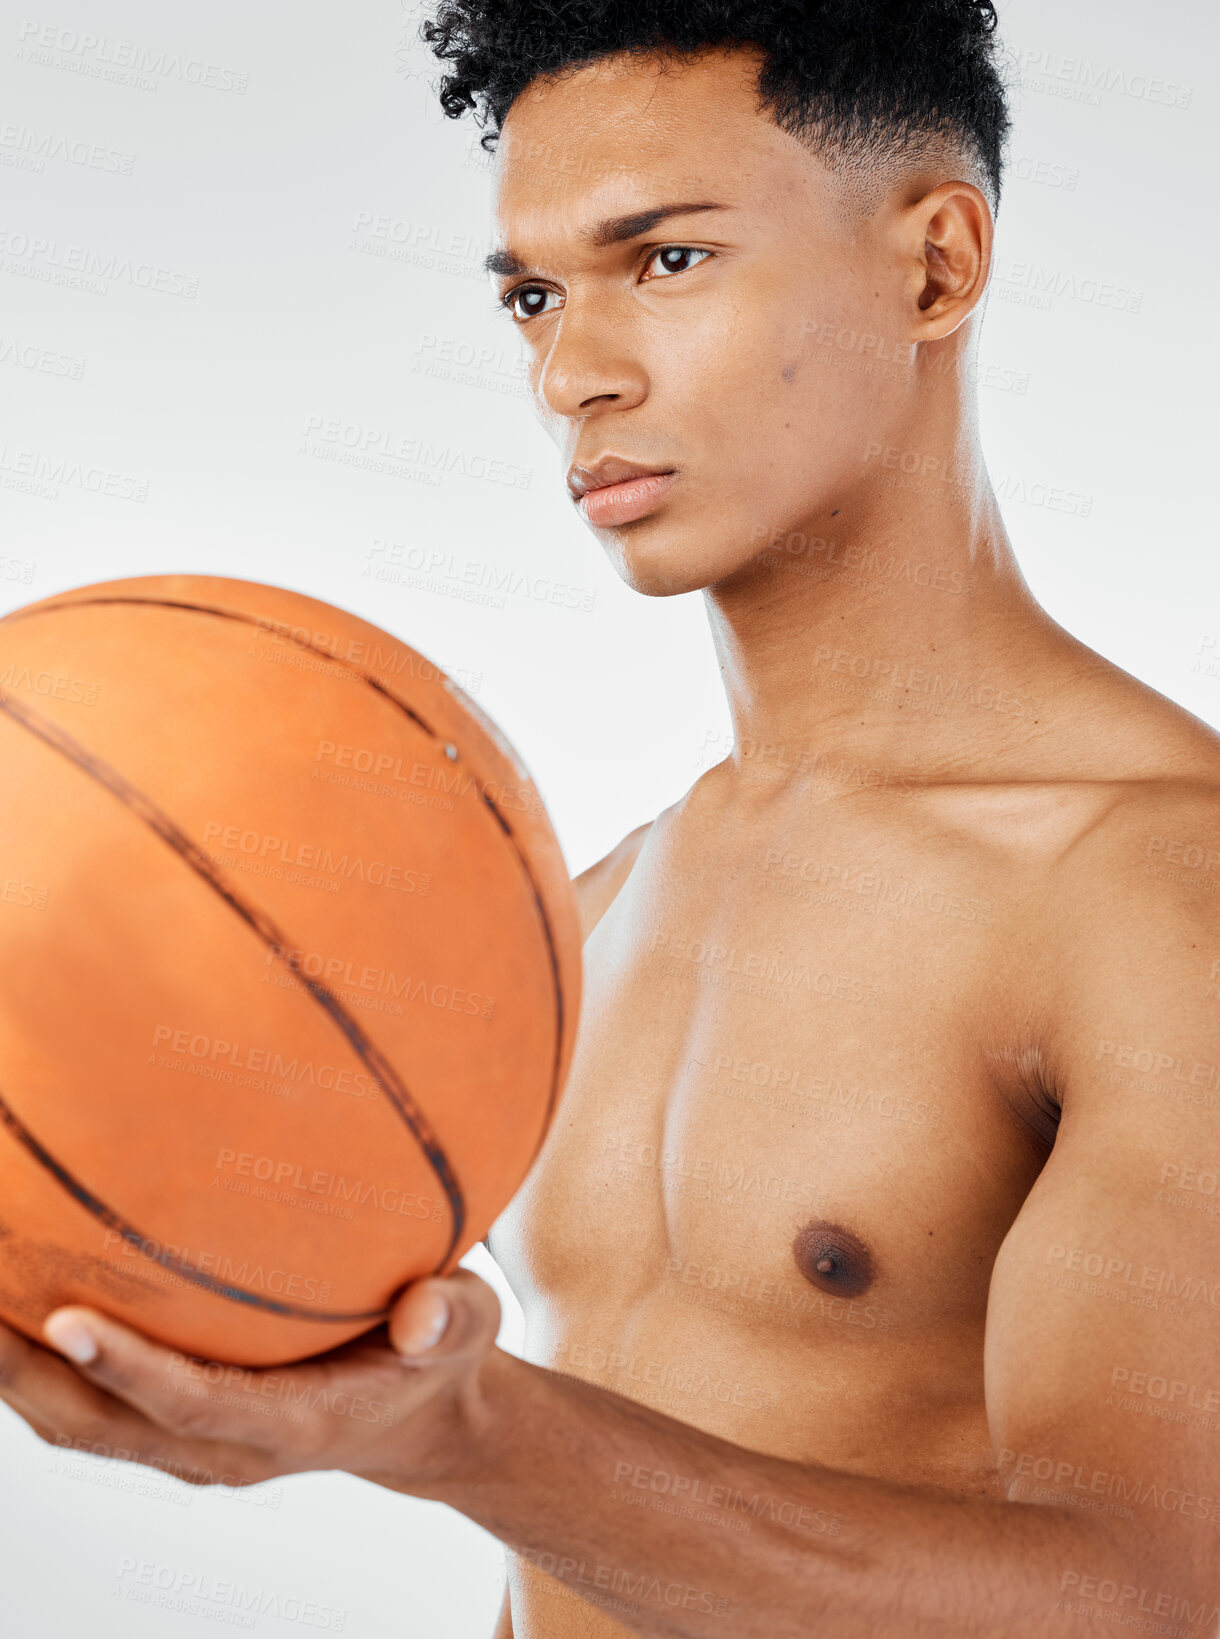 Buy stock photo Sports, focus and black man or basketball player with ball for training game, fitness competition or practice match. Athlete health motivation, thinking and strong model ready for exercise workout